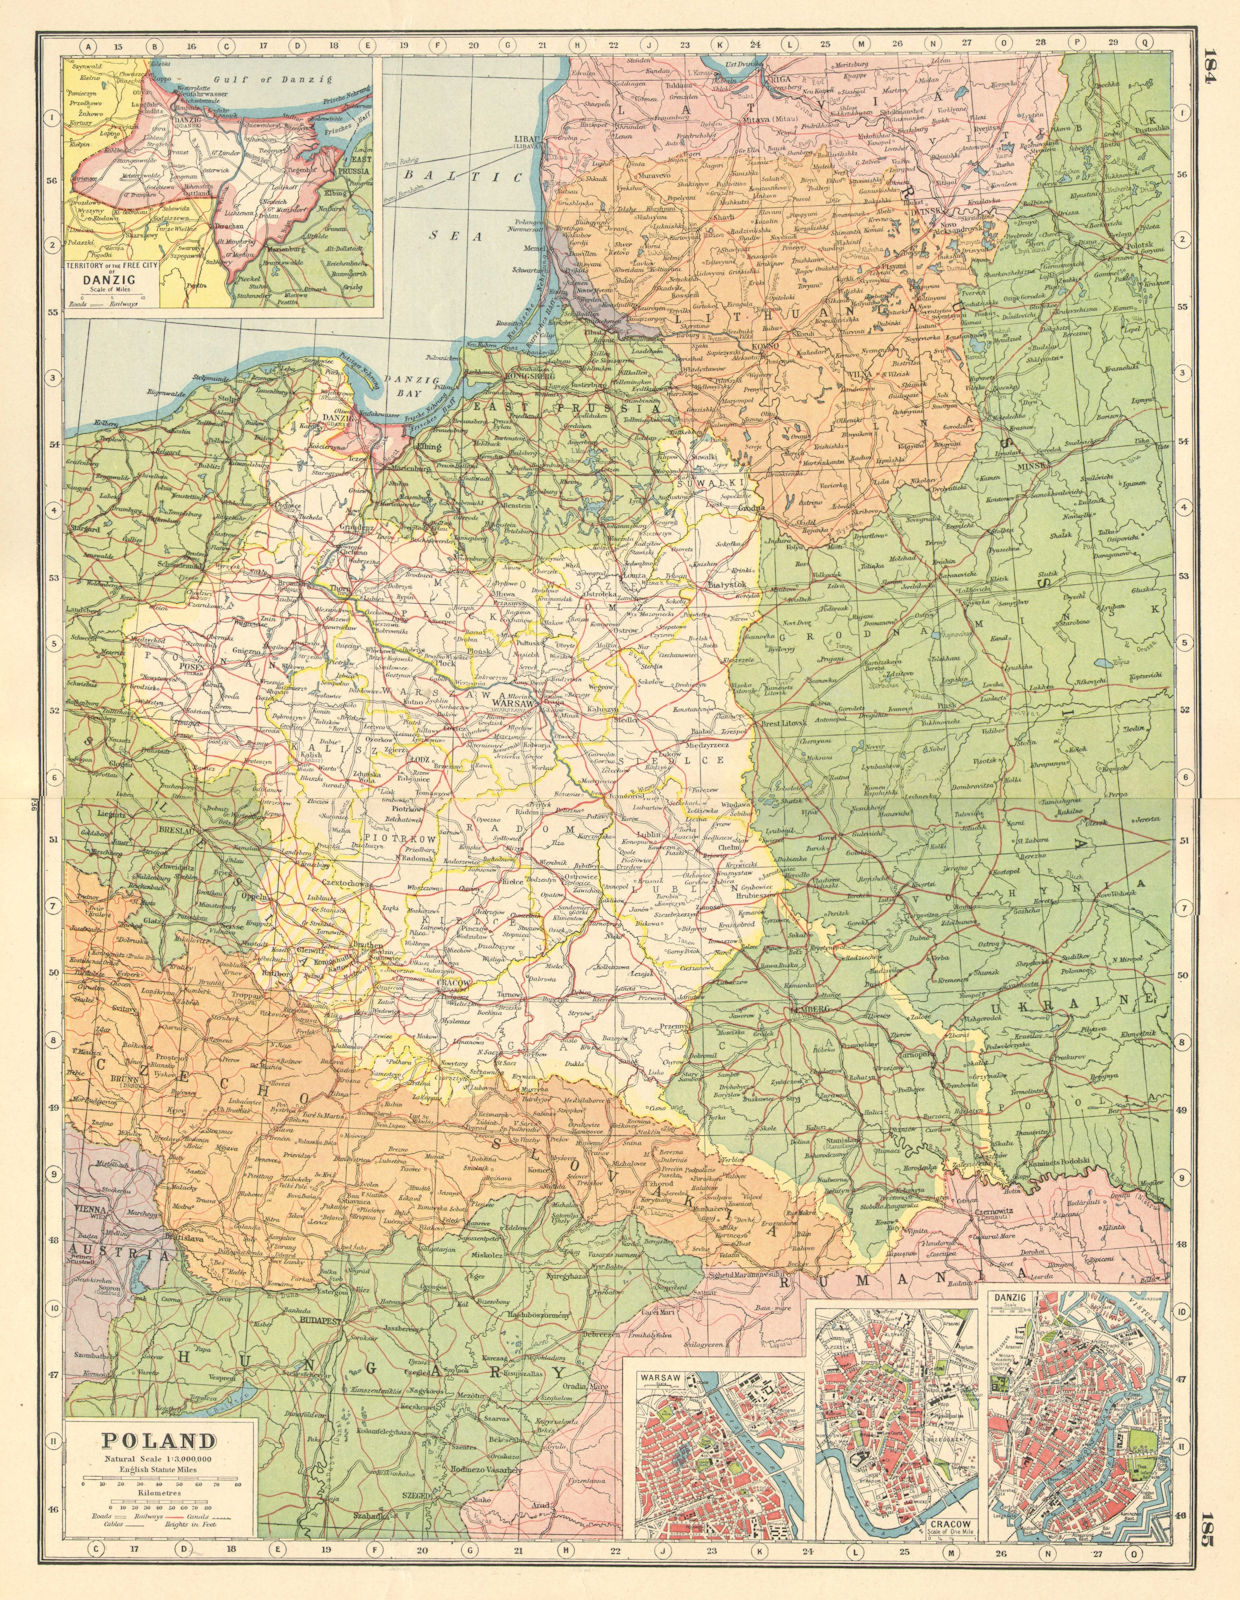 POLAND. inset plans of Danzig Gdansk Warsaw Kraków Cracow.East Prussia 1920 map